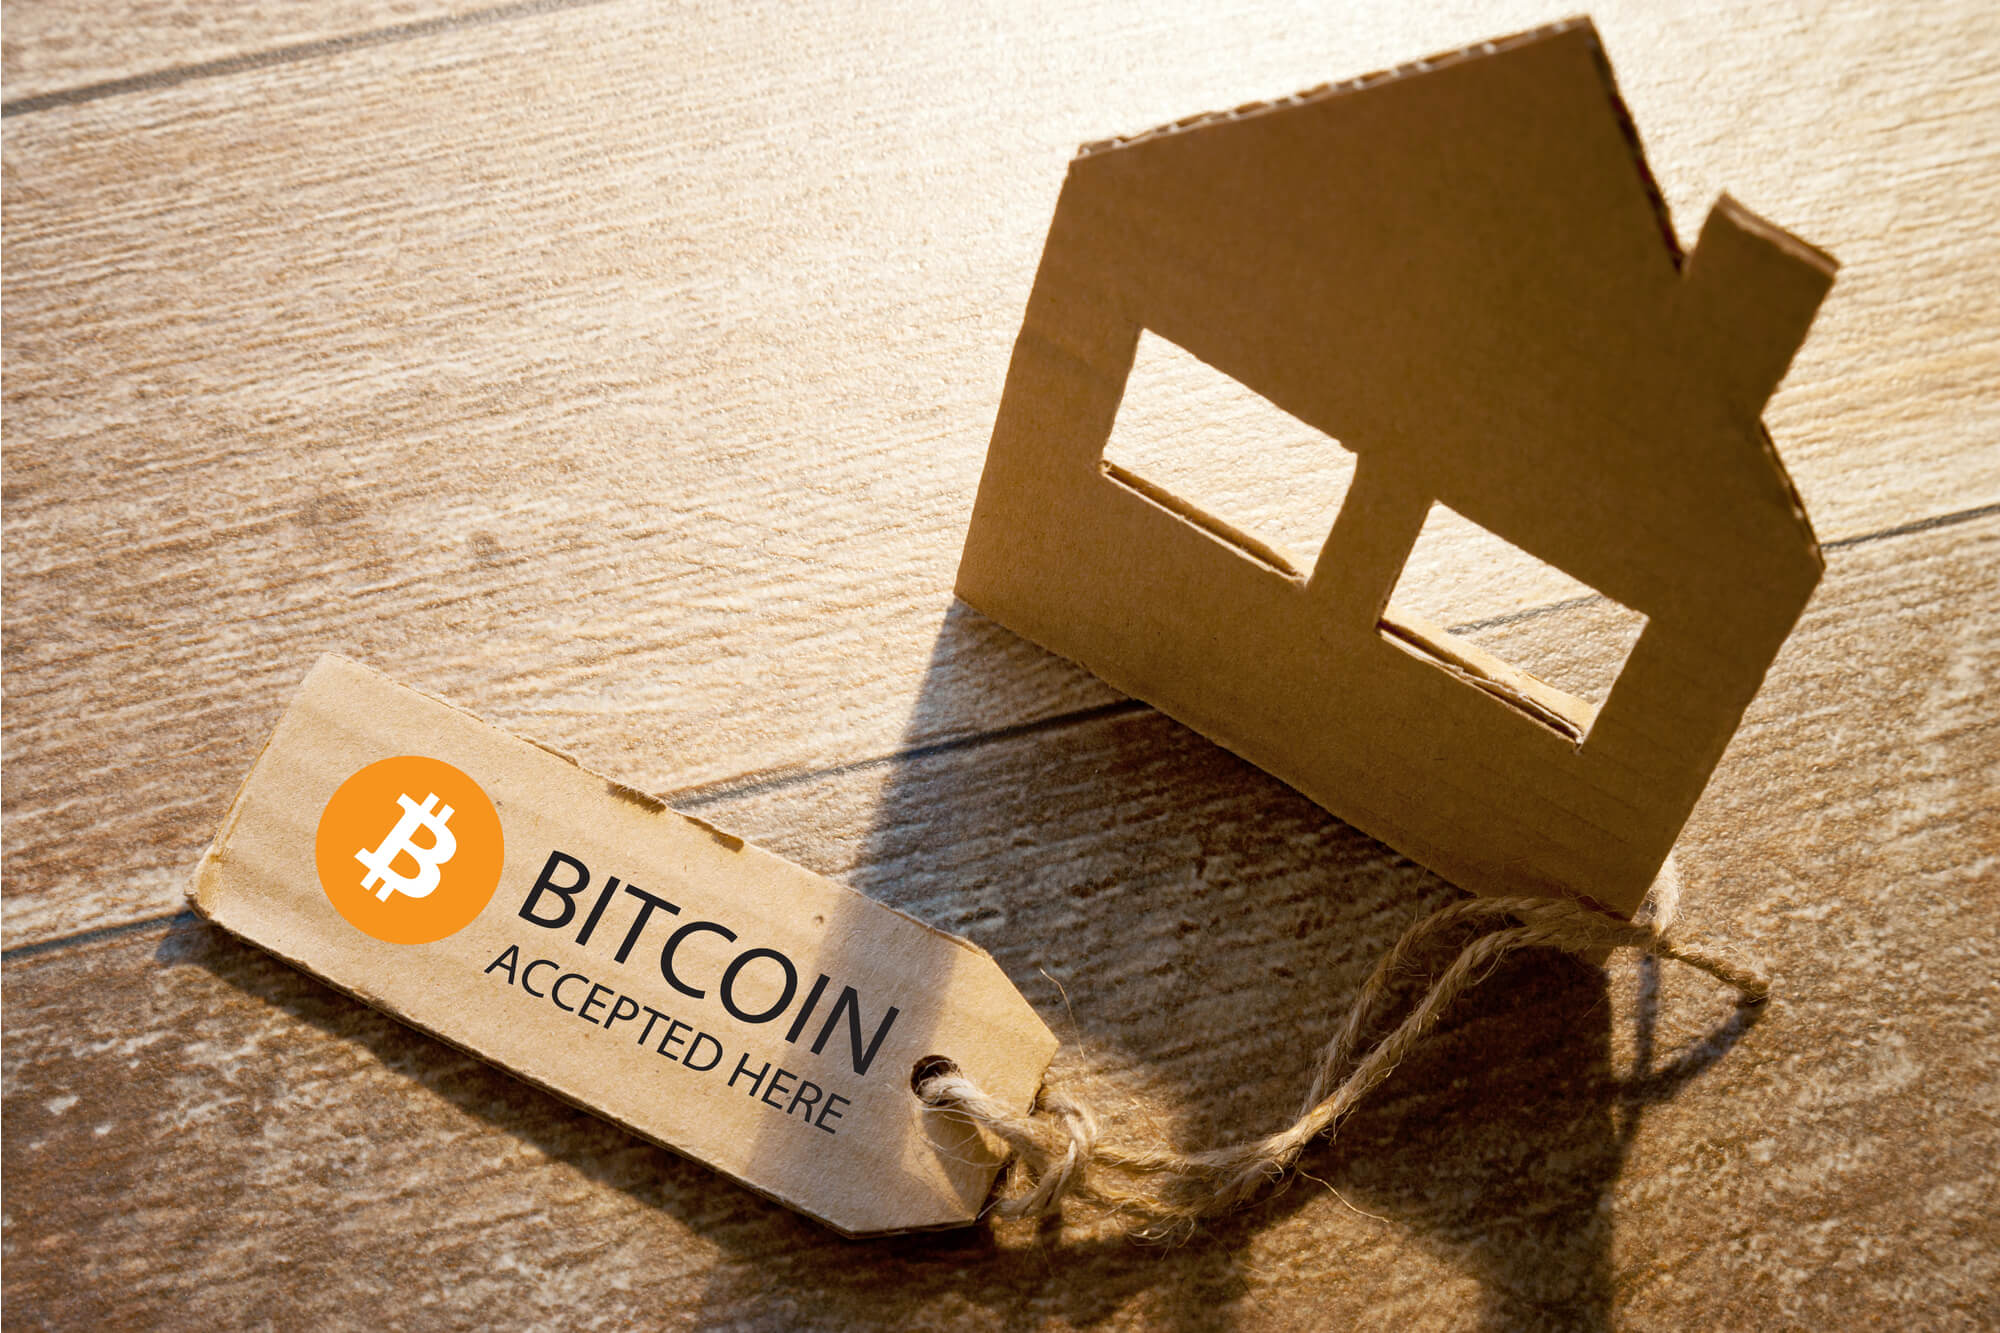 Little cardboard diagram of rental accommodation like Airbnb accepting Bitcoin